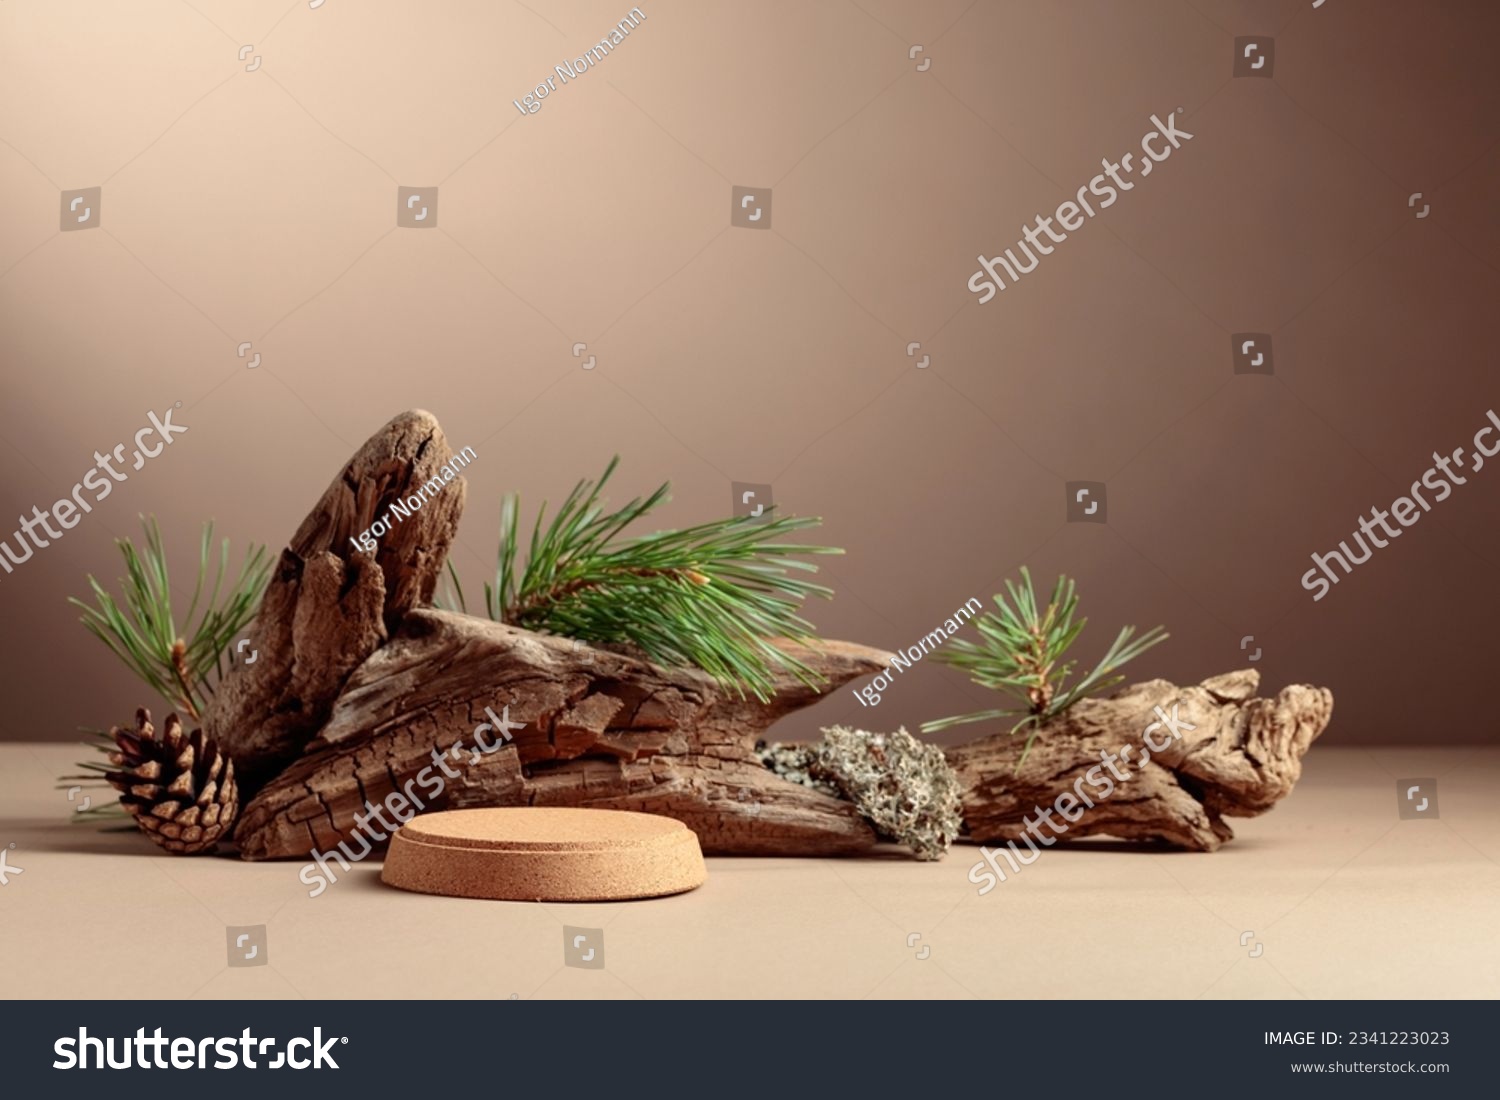 Abstract north nature scene with a composition of lichen, pine branches, and dry snags. Place your product on a cork podium. Copy space. #2341223023